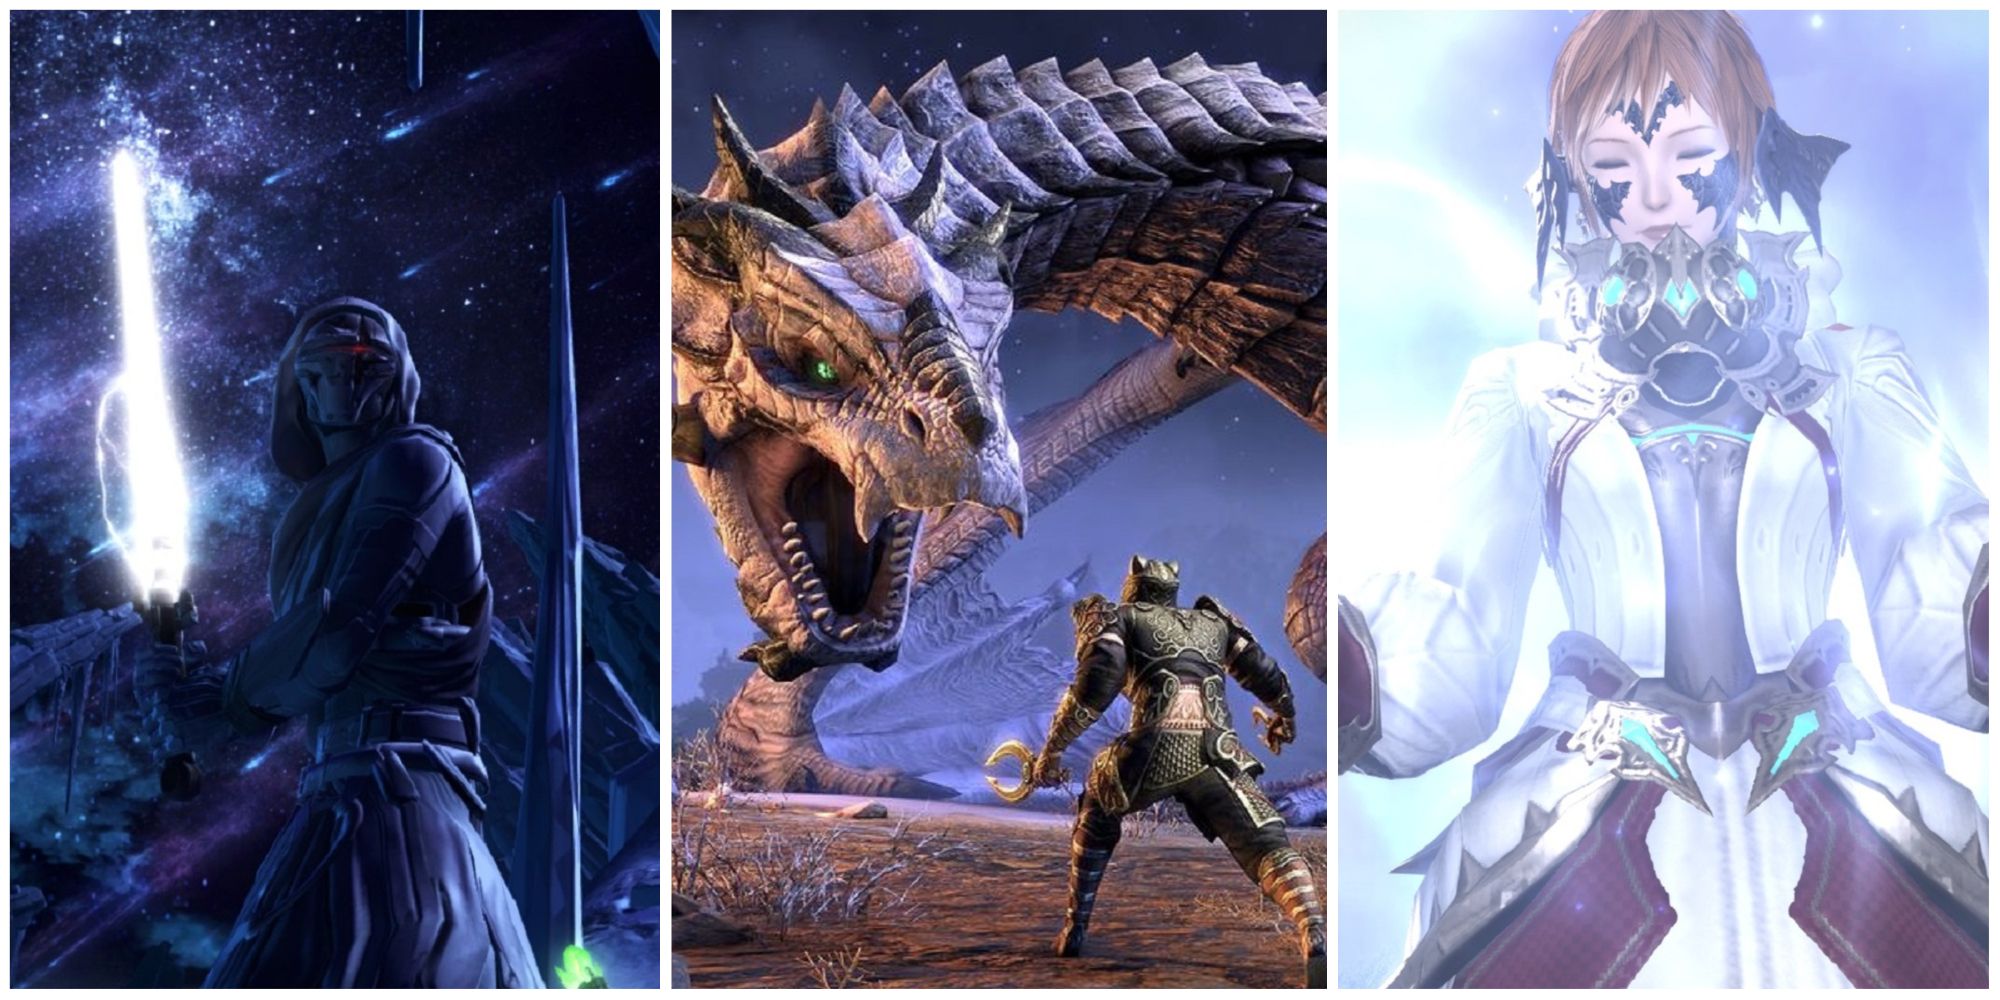 Star Wars the Old Republic, The Elder Scrolls Online, and Final Fantasy XIV